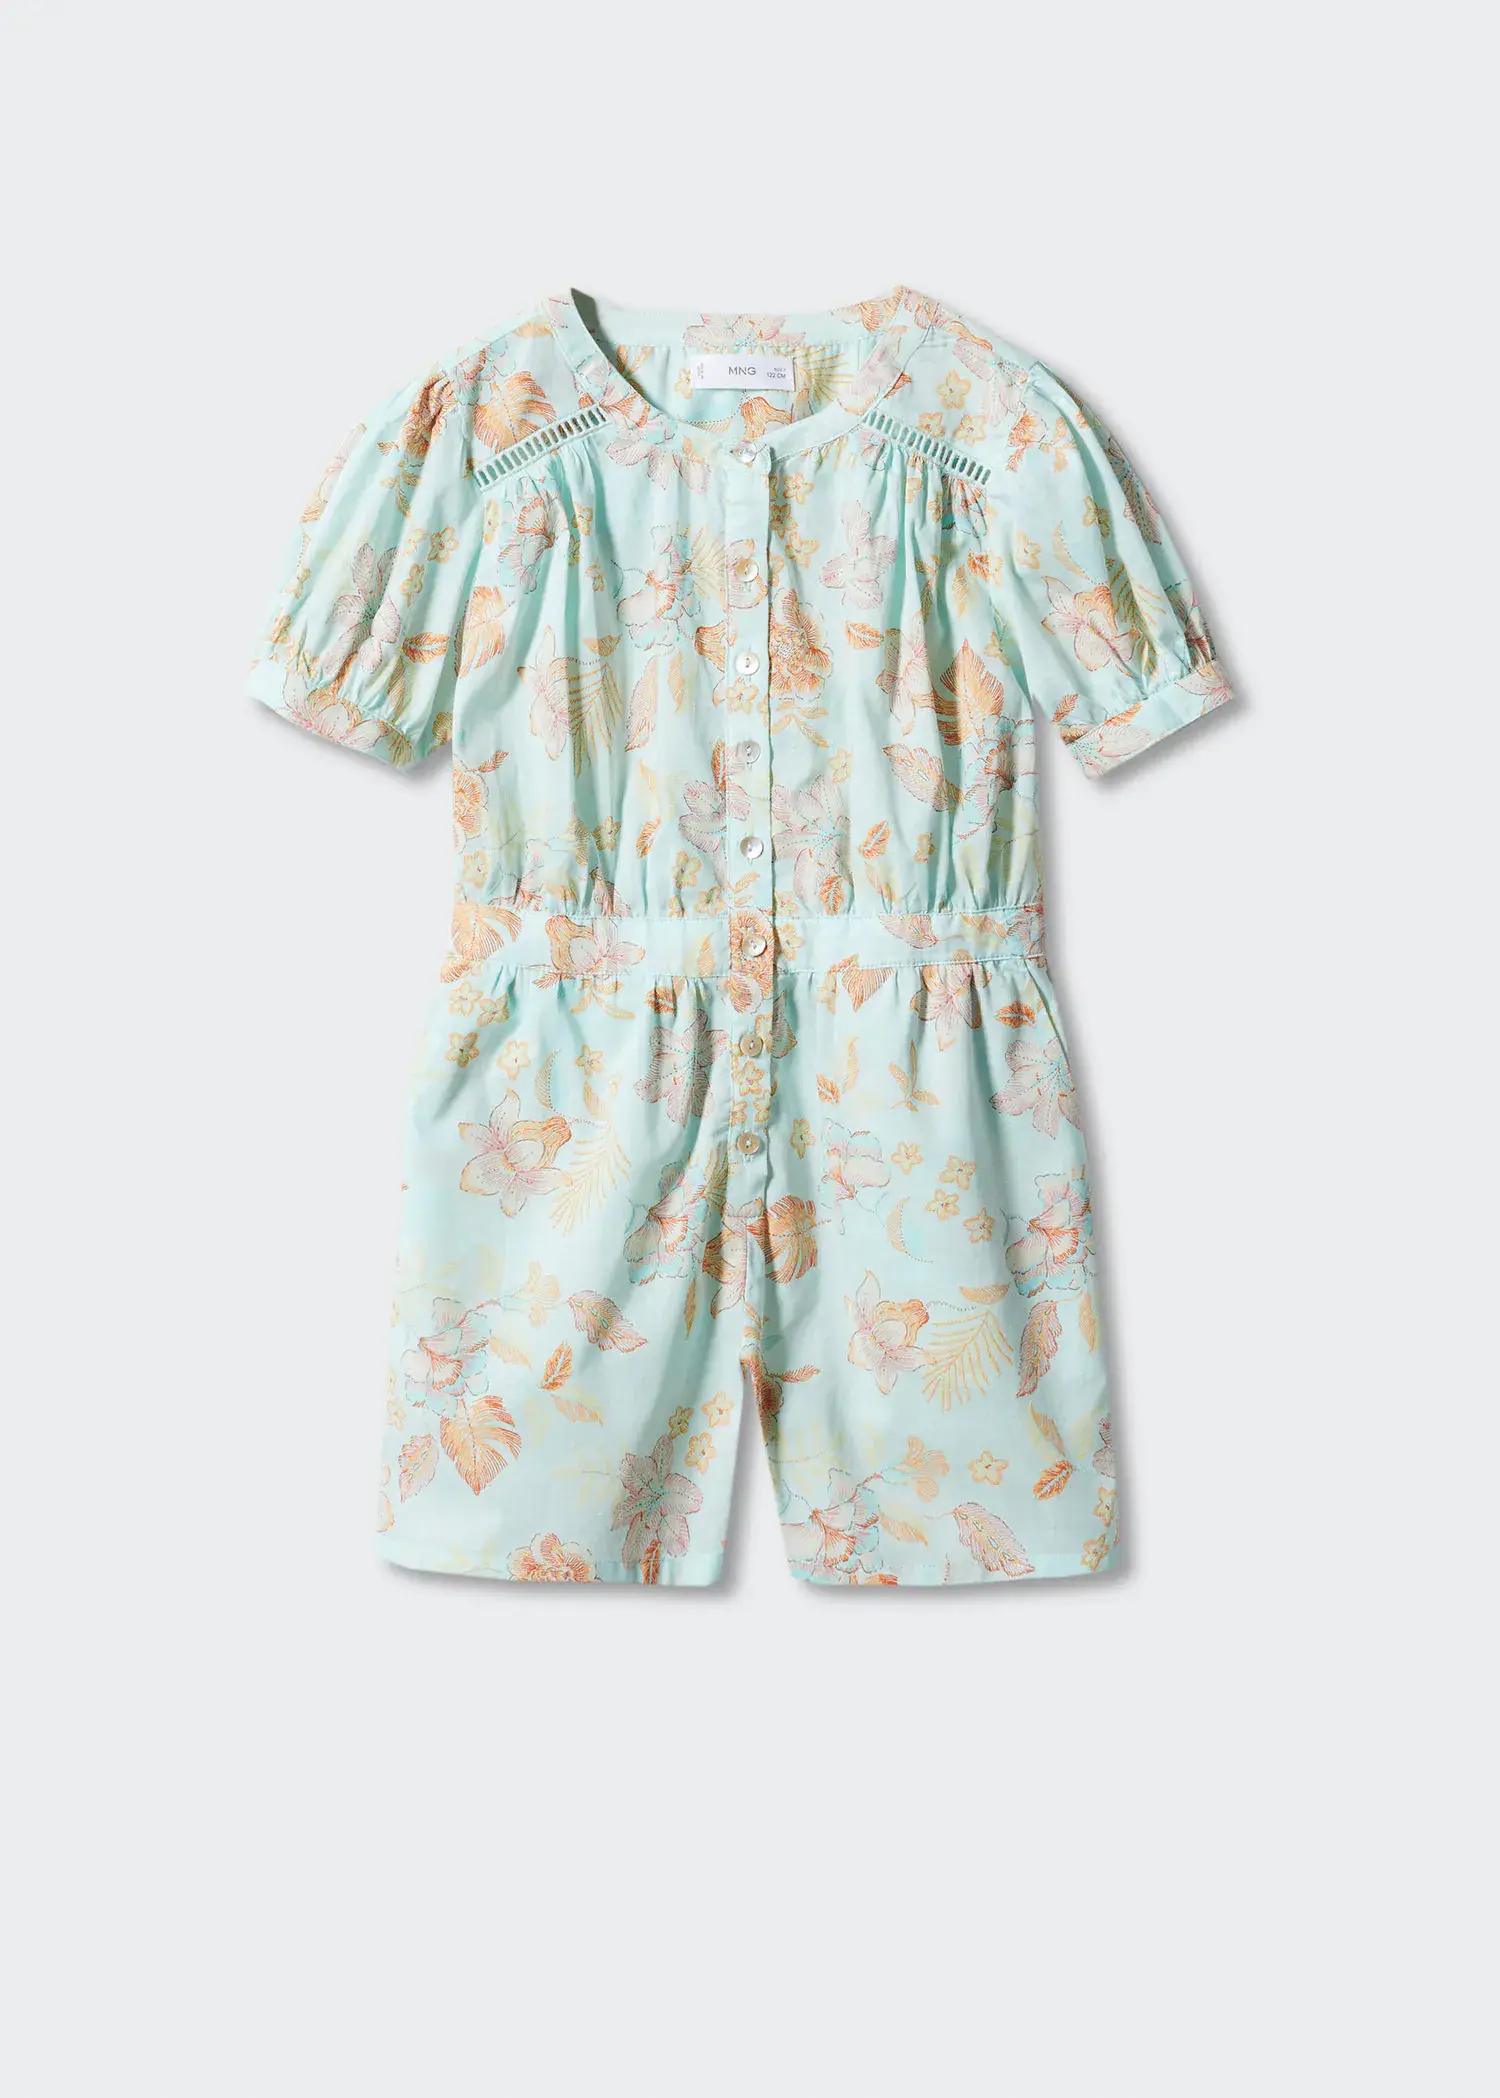 Mango Printed short jumpsuit. a light blue and white floral print romper. 